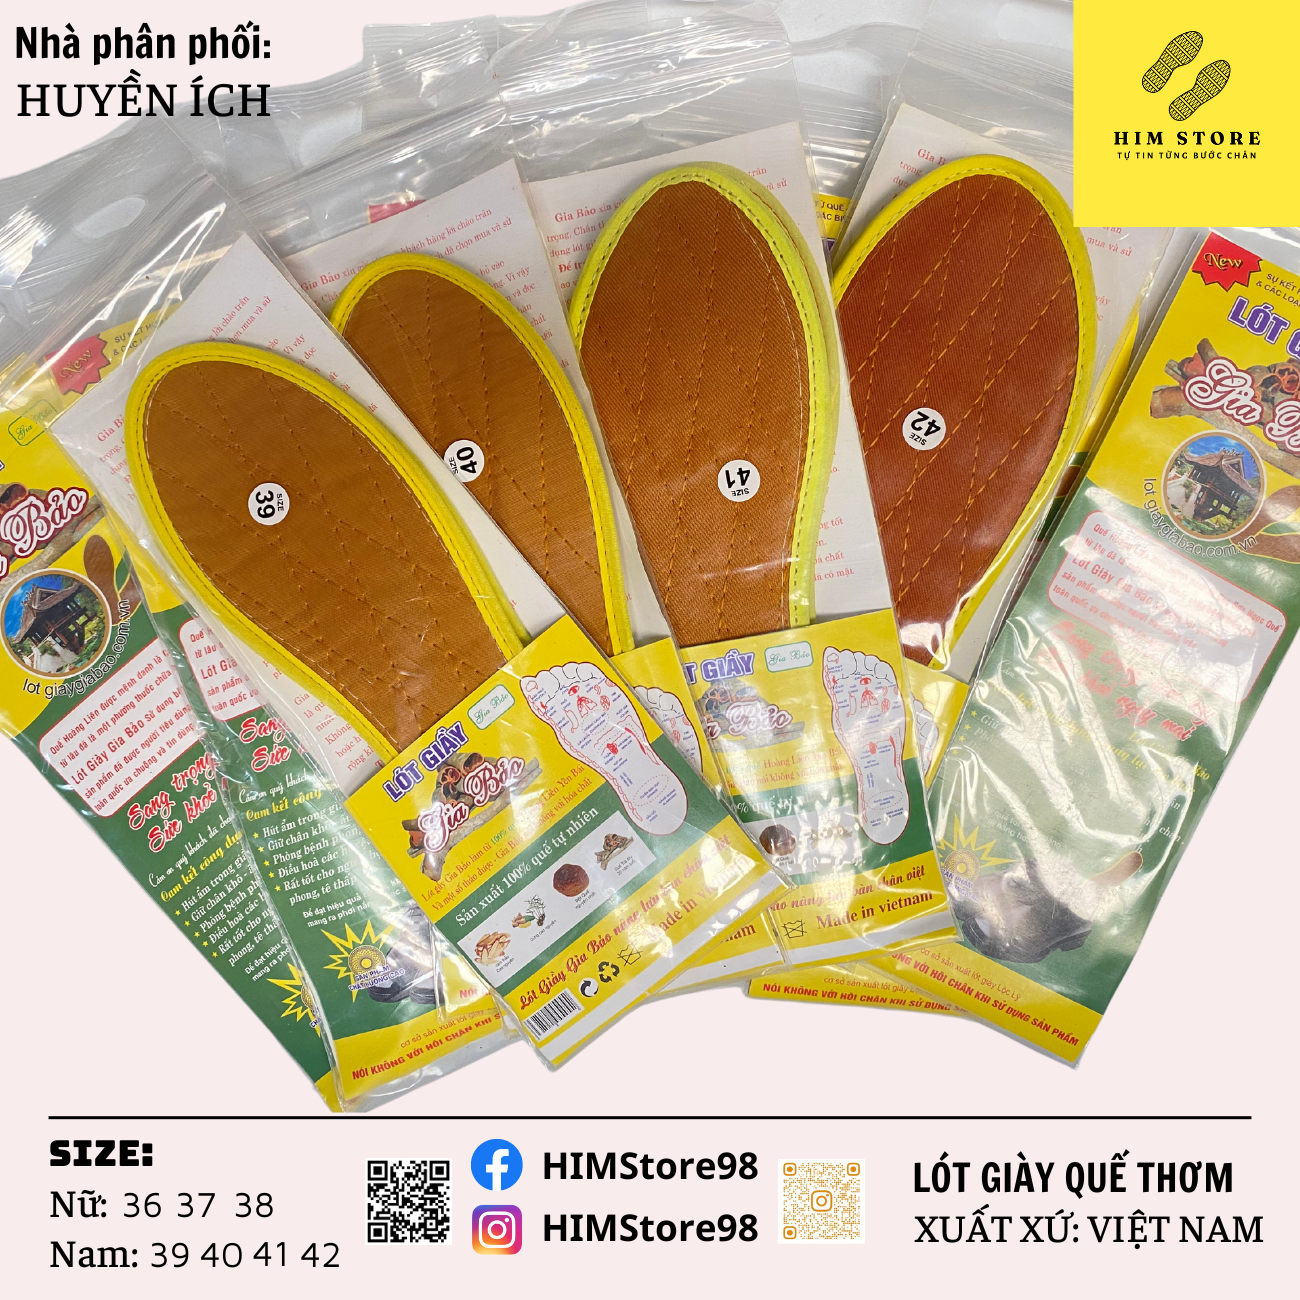 Shoe insoles Cassia fragrance type 1 is made from 100% cinnamon powder